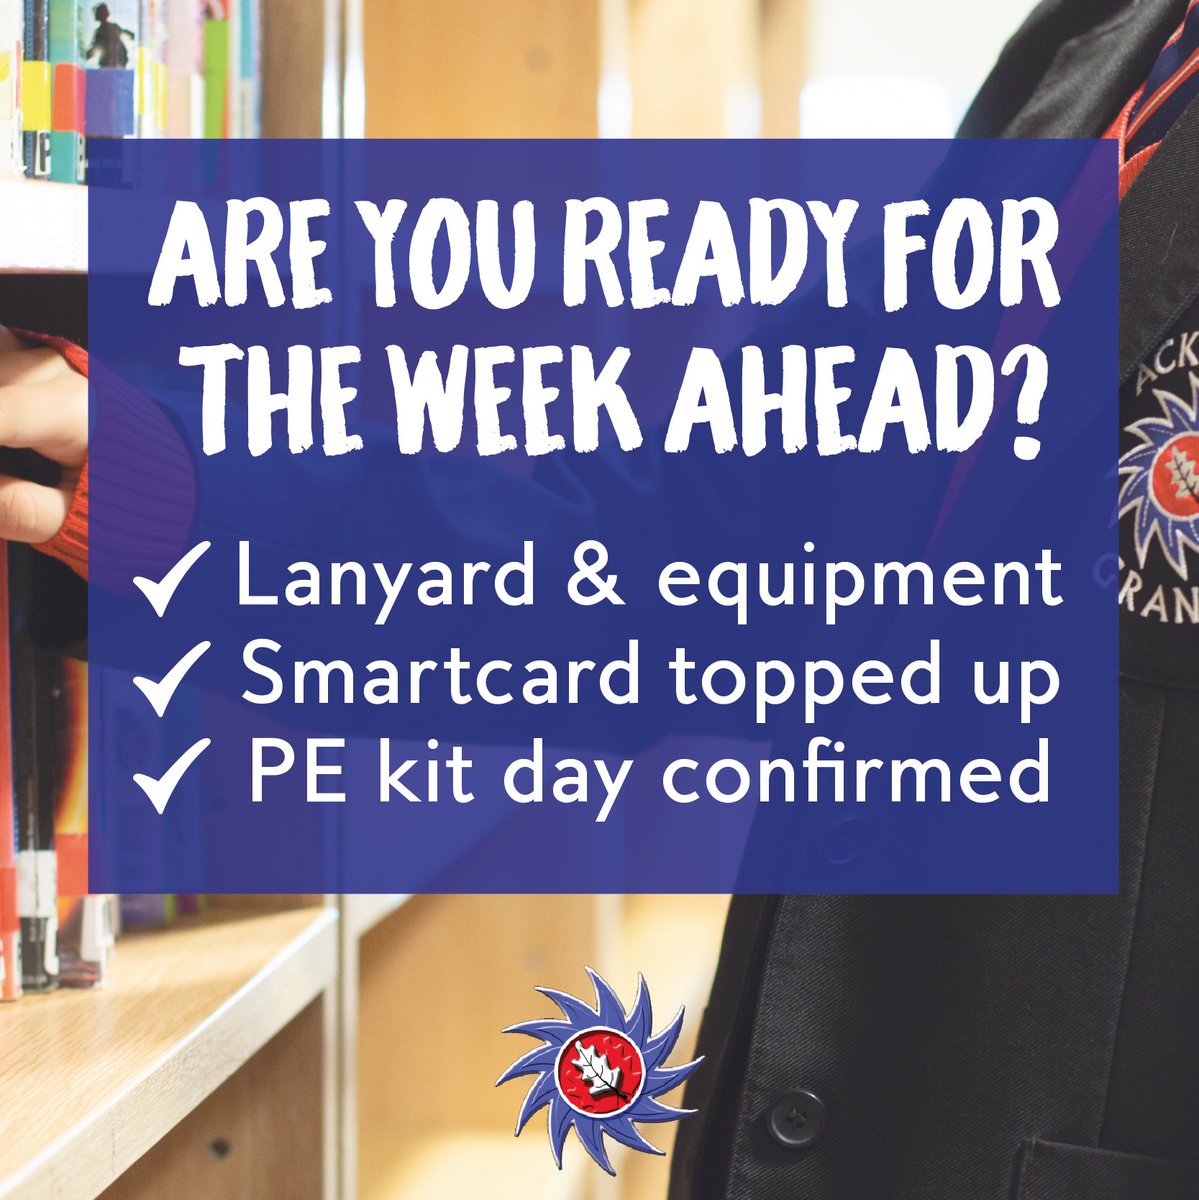 Are you ready for the week ahead? 🤔 ✅ Lanyard & equipment ✅ Smartcard topped up ✅ PE kit day confirmed We can't wait to see everyone tomorrow, and don't forget FREE breakfast from 8am 👍